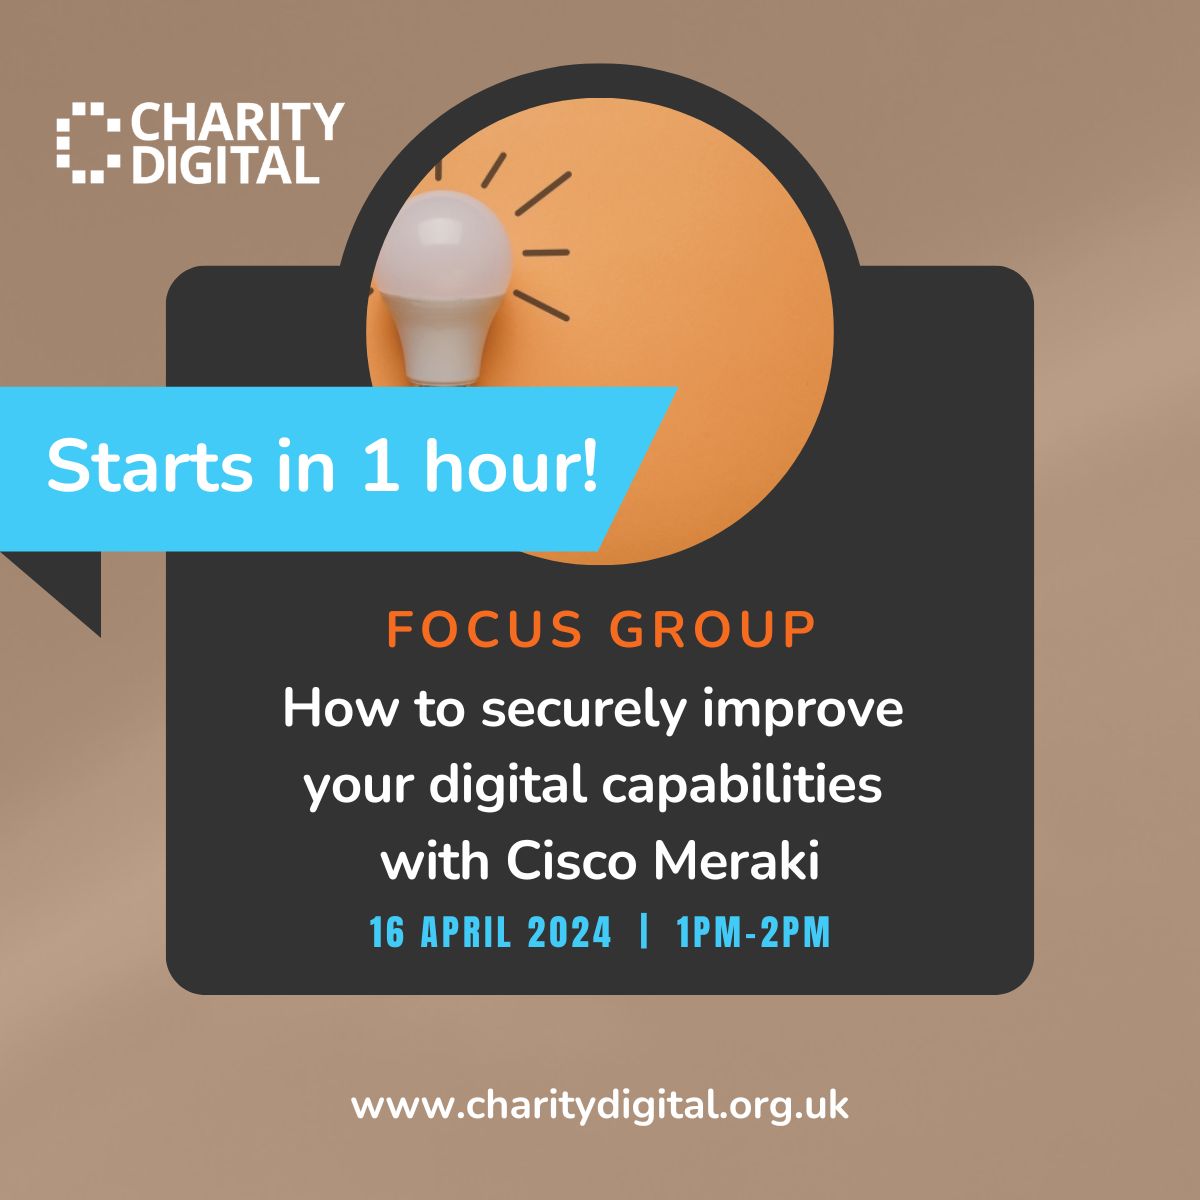 ⏰ ONE HOUR TO GO! ⏰ We'd love to see you there! Join here us here ⬇️ ow.ly/5urE50ReKAX #CharityDigital #Cisco #FocusGroup